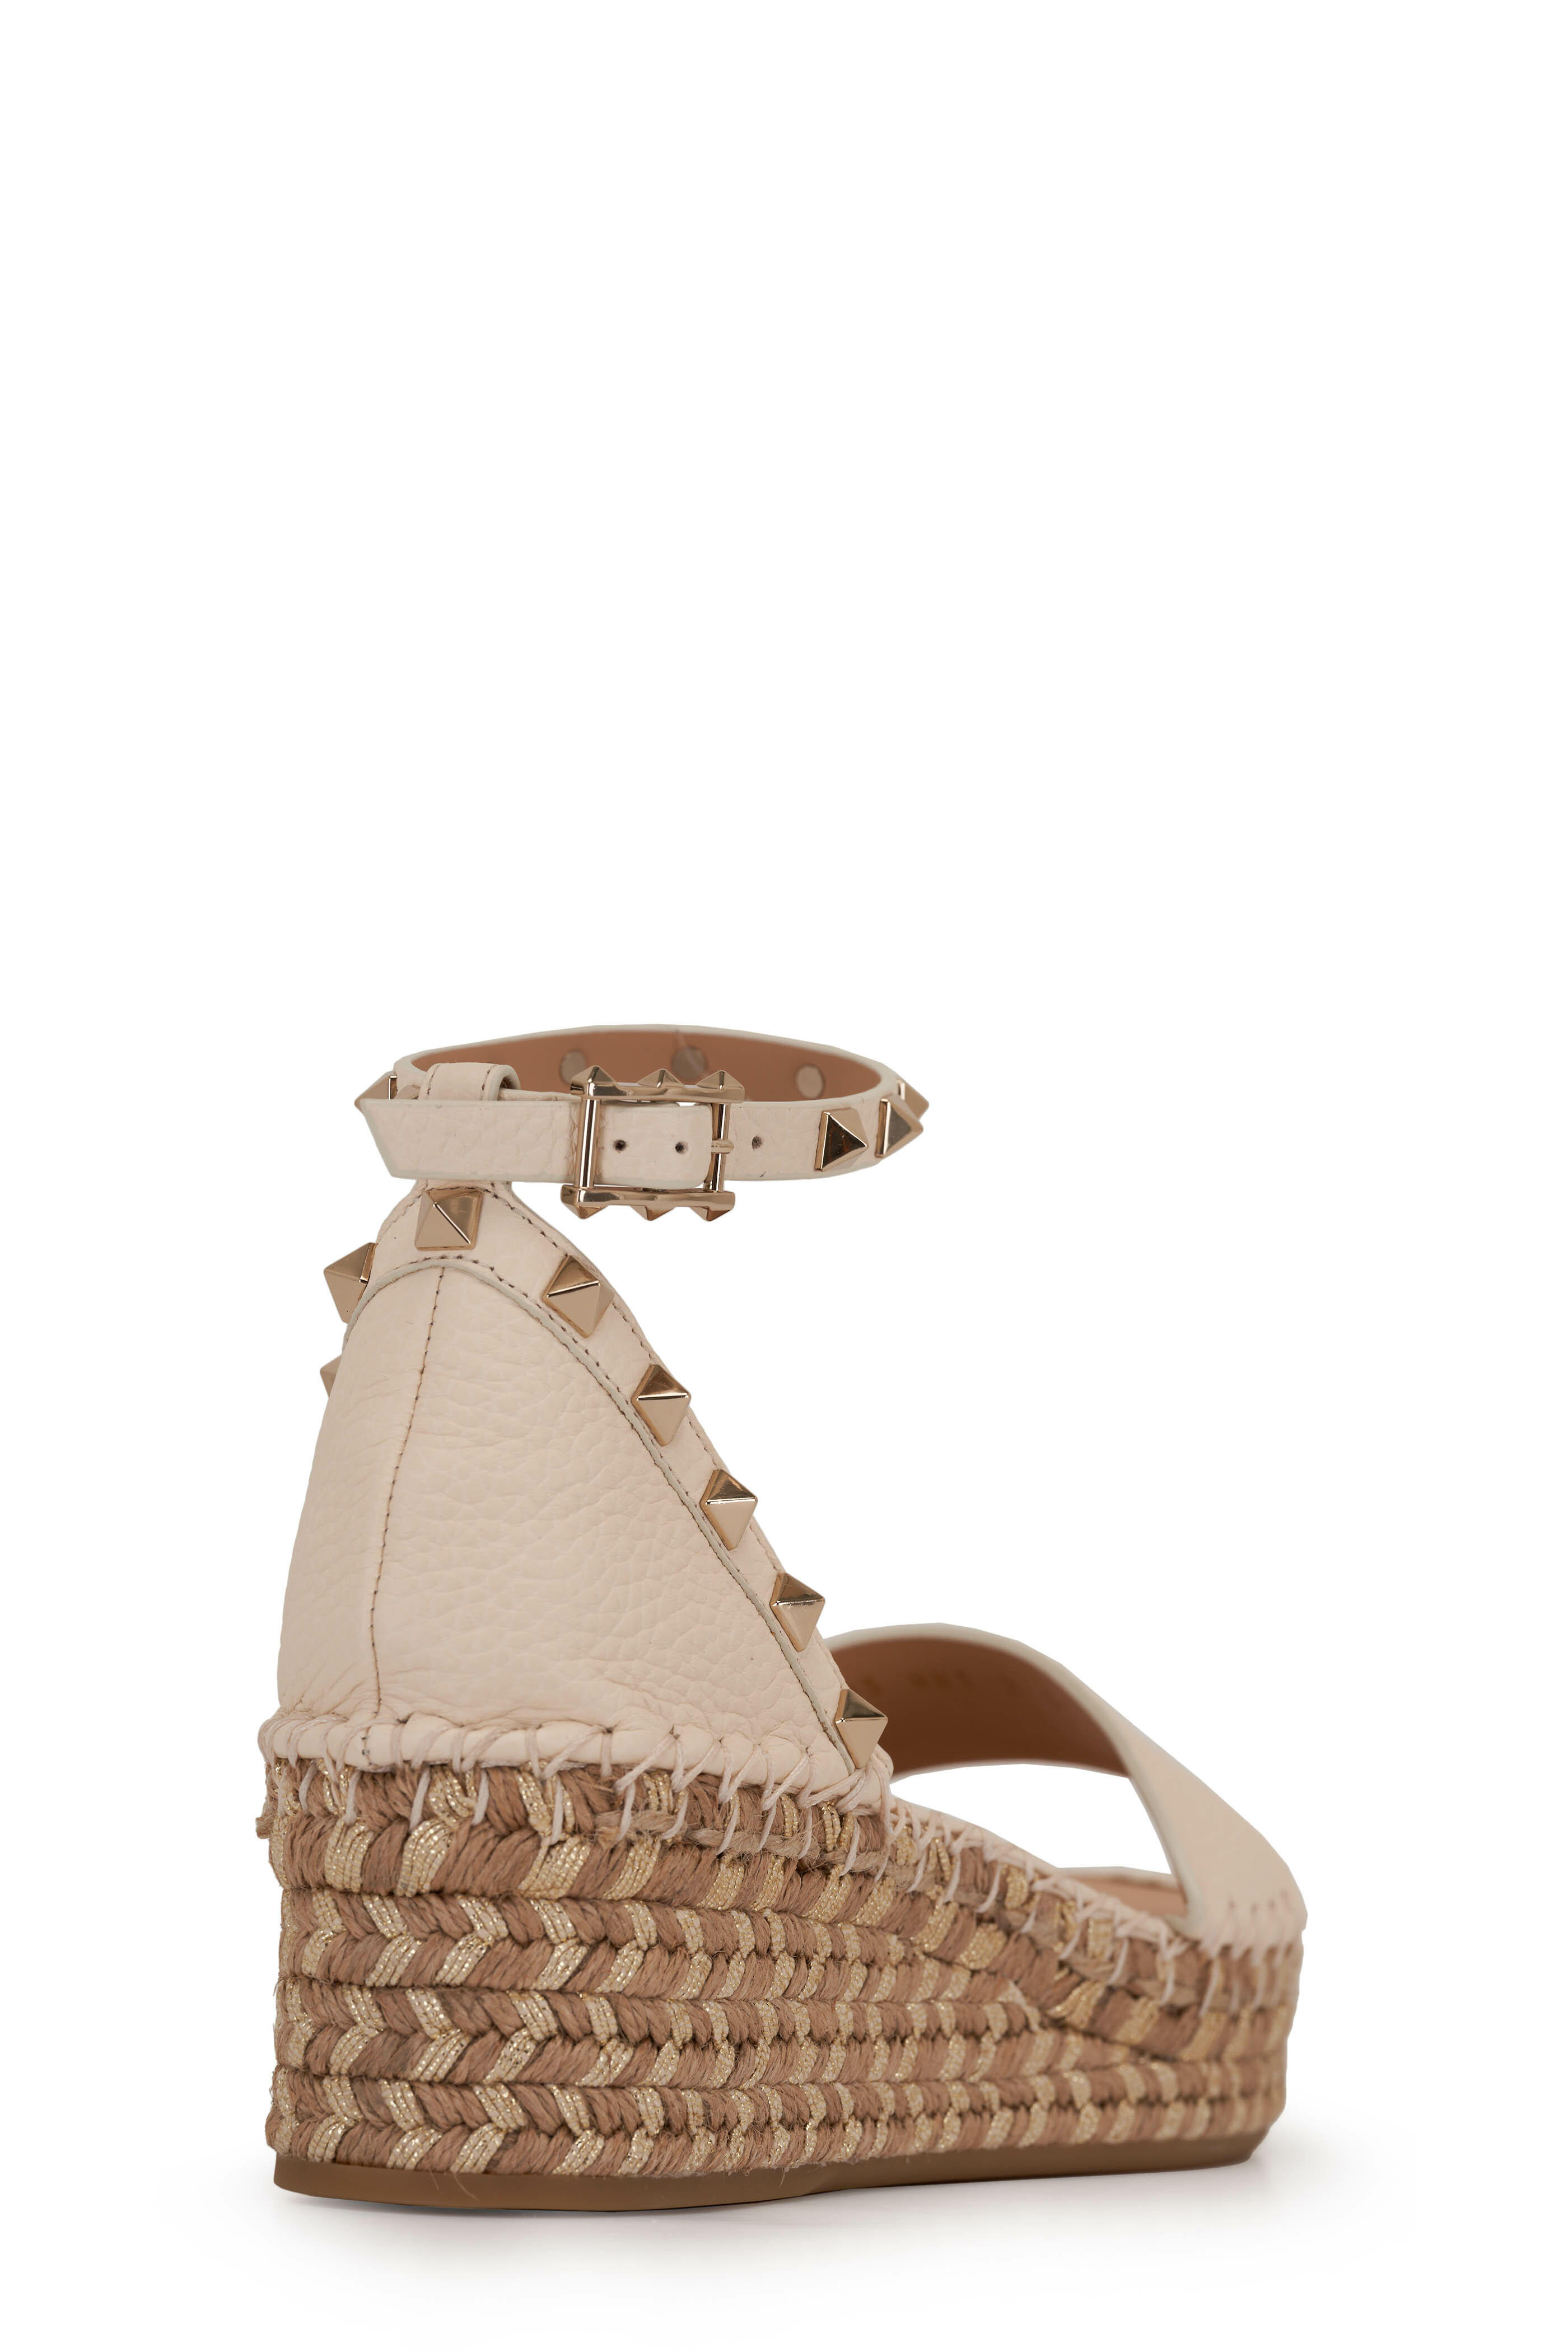 Off White Leather-Look Quilted Espadrille Sandals